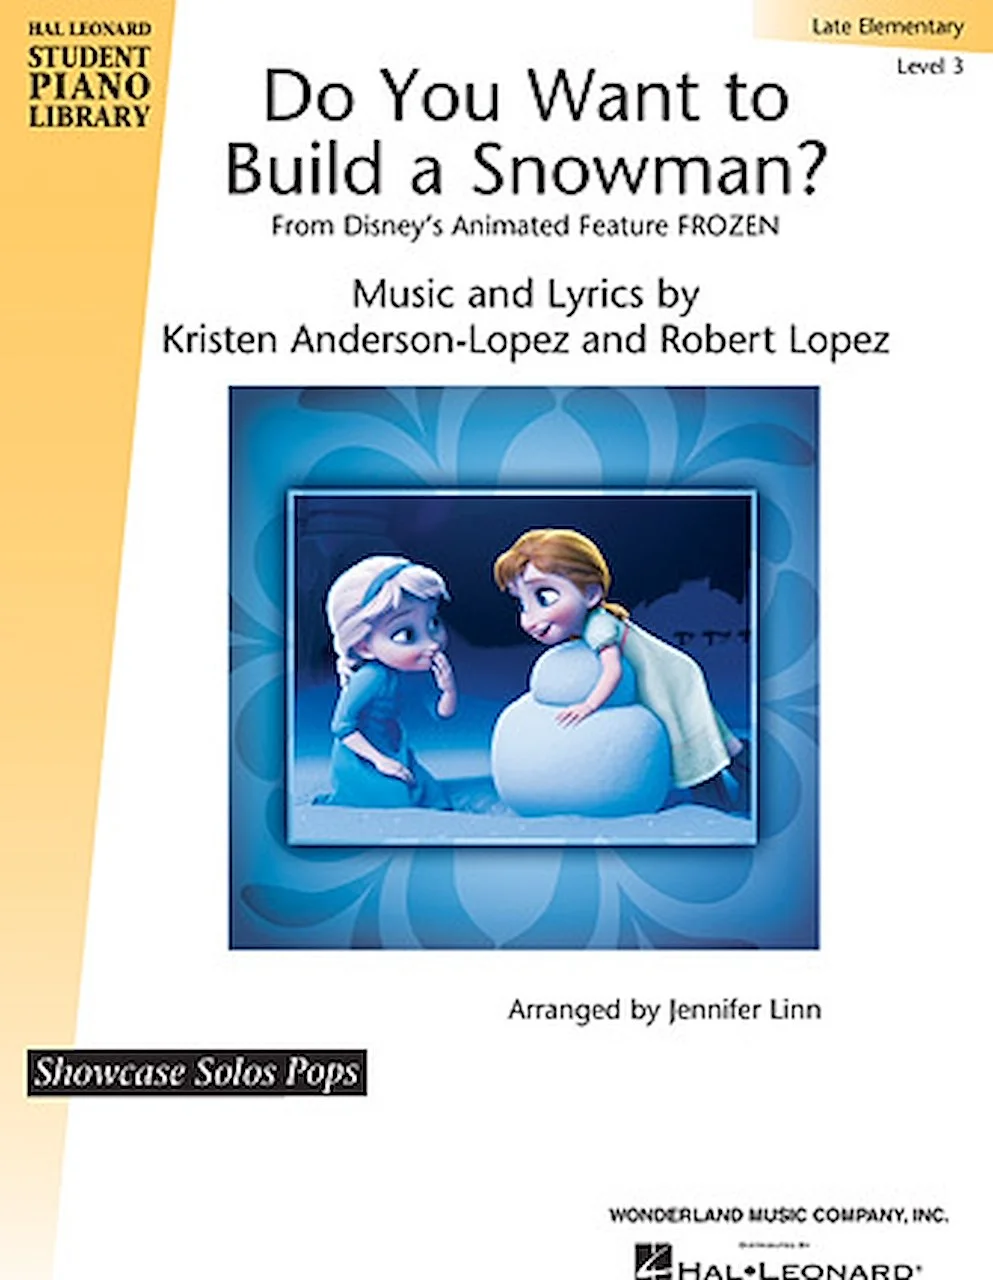 do you want to build a snowman song